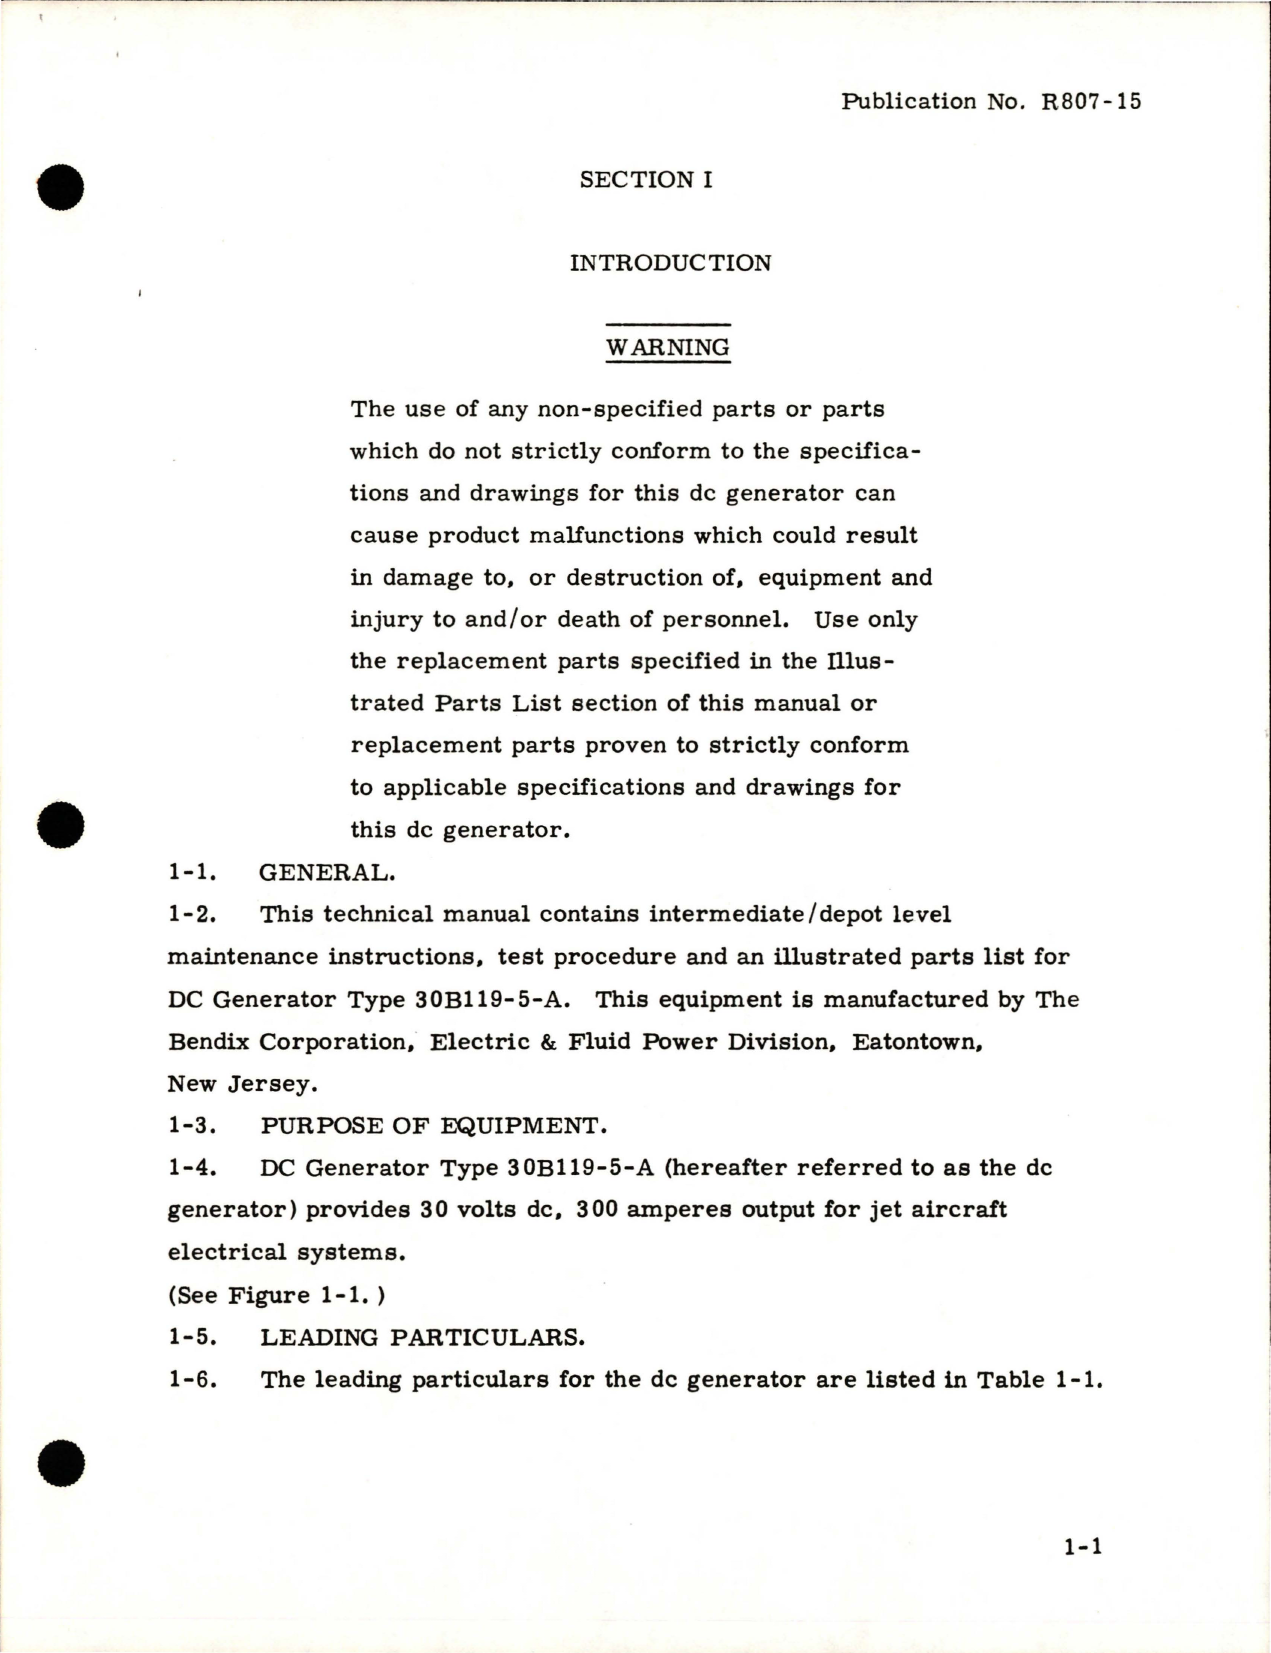 Sample page 7 from AirCorps Library document: Maintenance Instructions with Illustrated Parts List for DC Generator - Type 30B119-5-A and 30B119-9-A